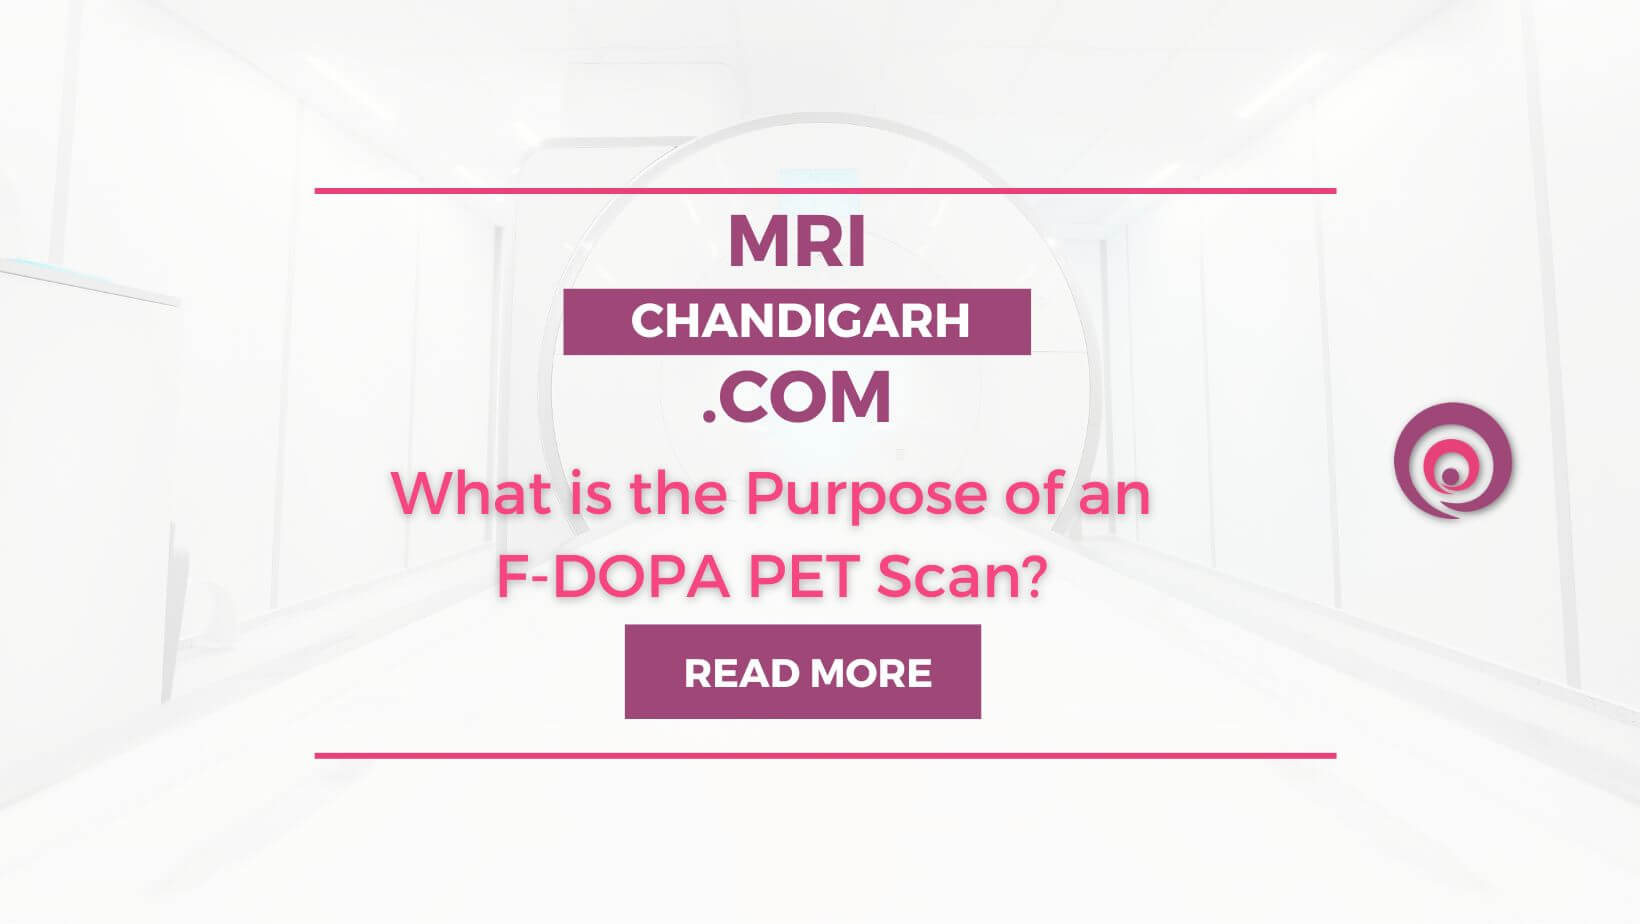 What is the Purpose of an F-DOPA PET Scan?